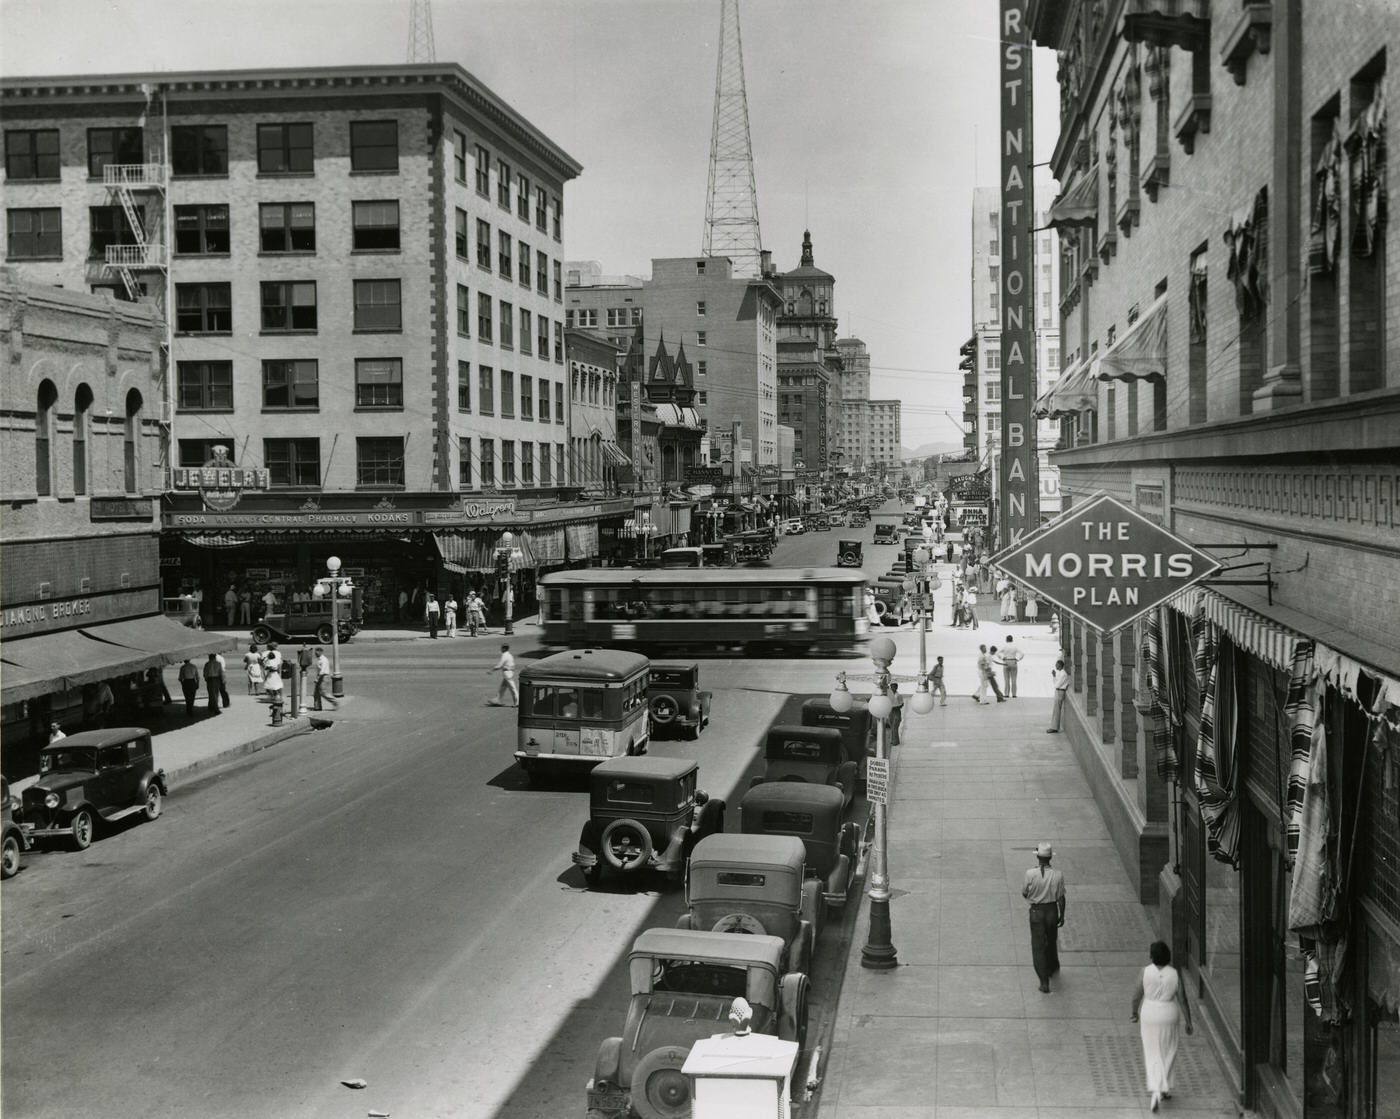 Intersection of Central Ave. and Washington St., 1930s